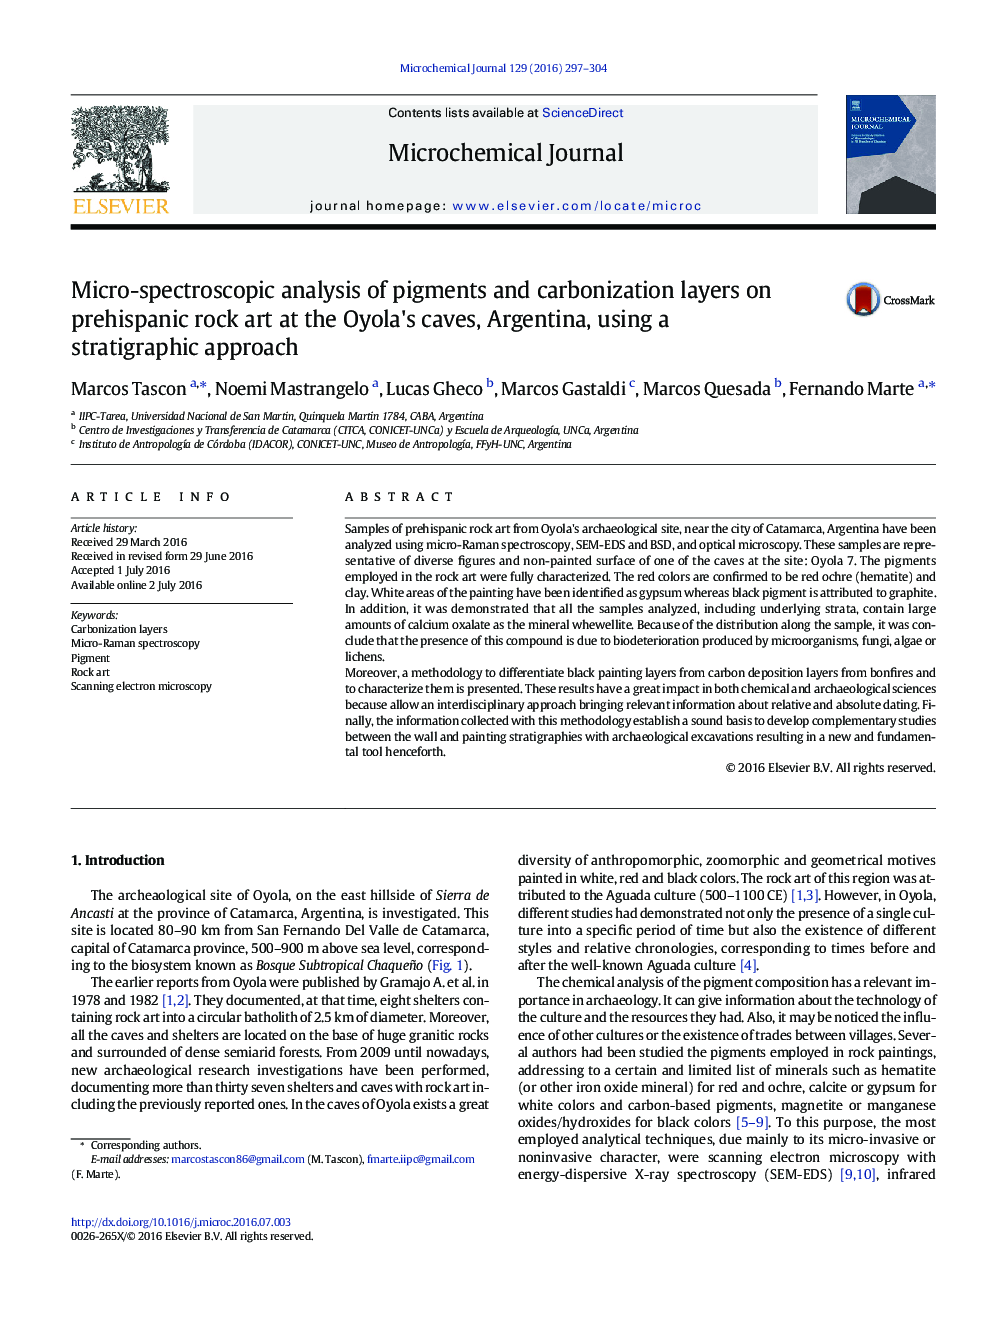 Micro-spectroscopic analysis of pigments and carbonization layers on prehispanic rock art at the Oyola's caves, Argentina, using a stratigraphic approach